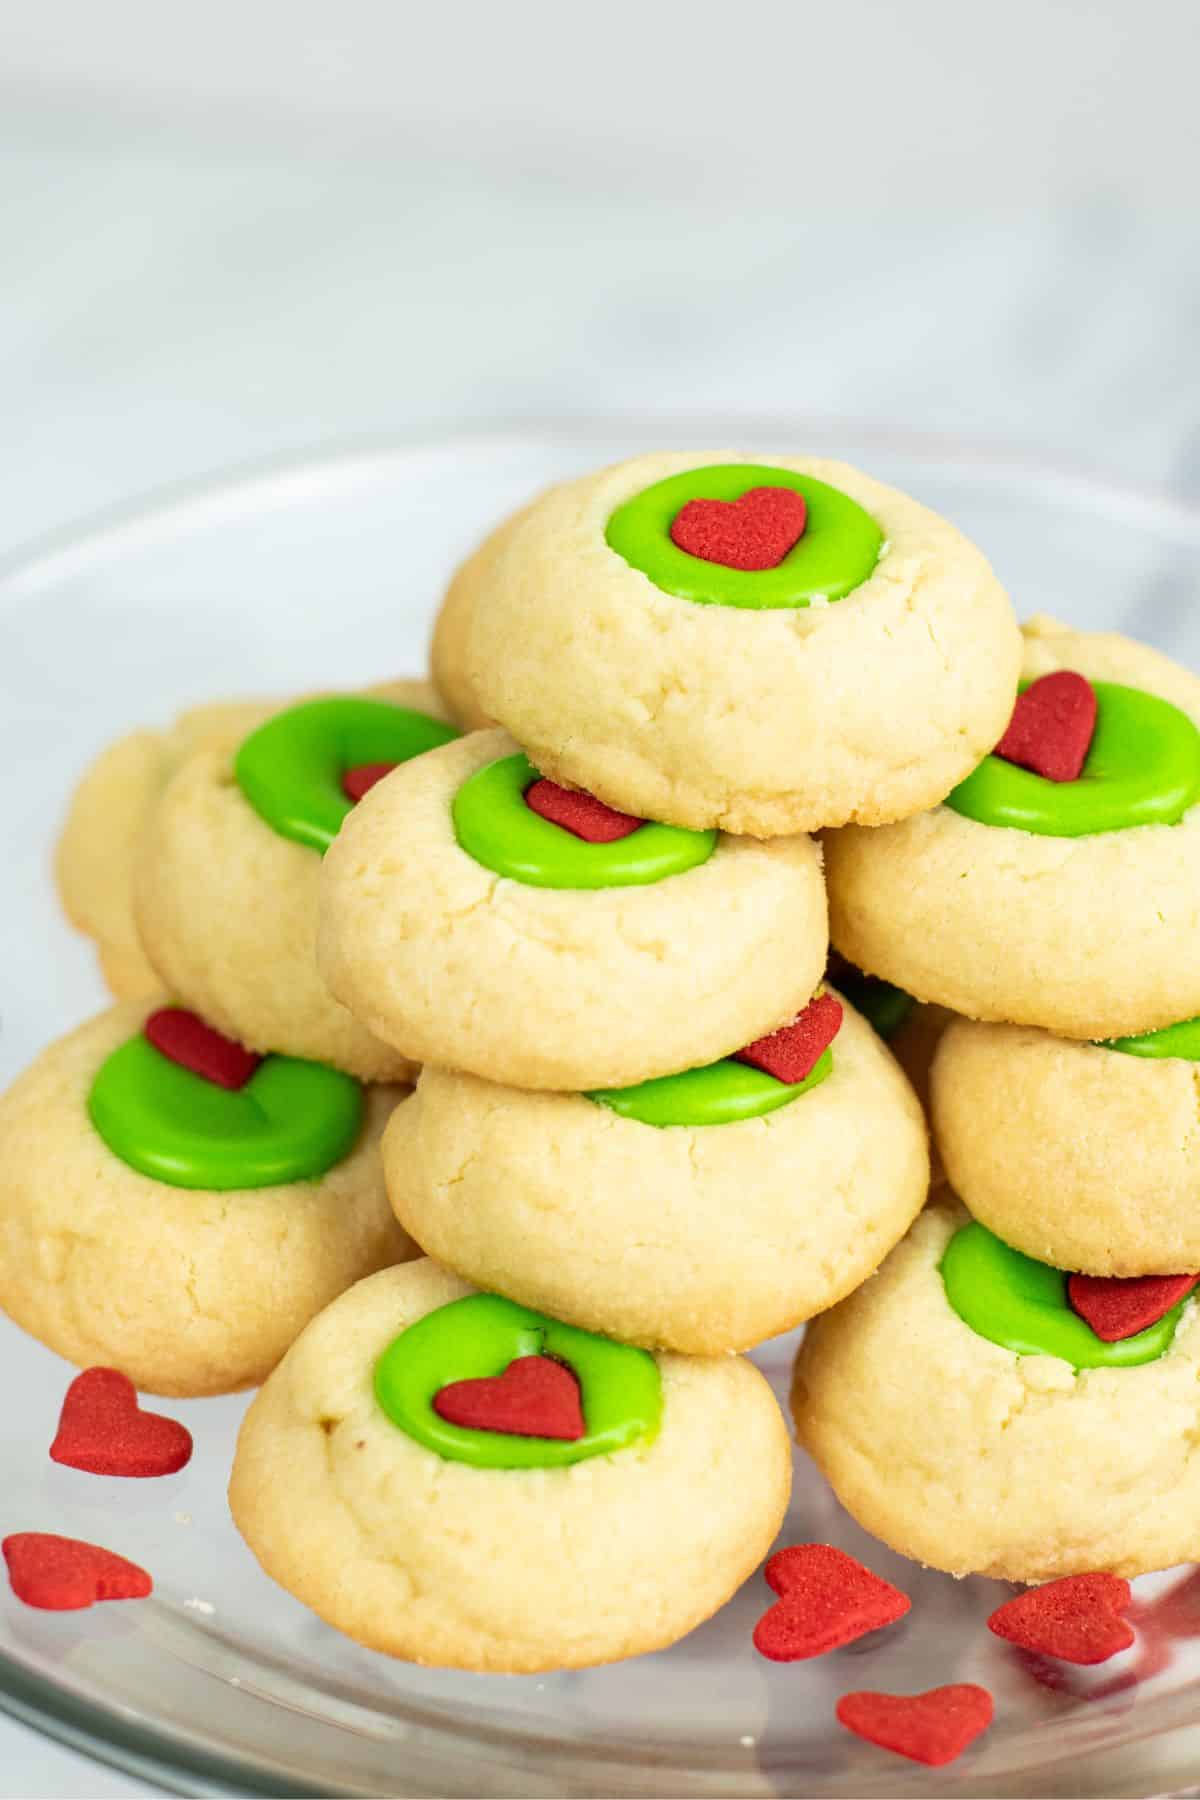 thumbprint cookies with lime green chocolate and a red heart